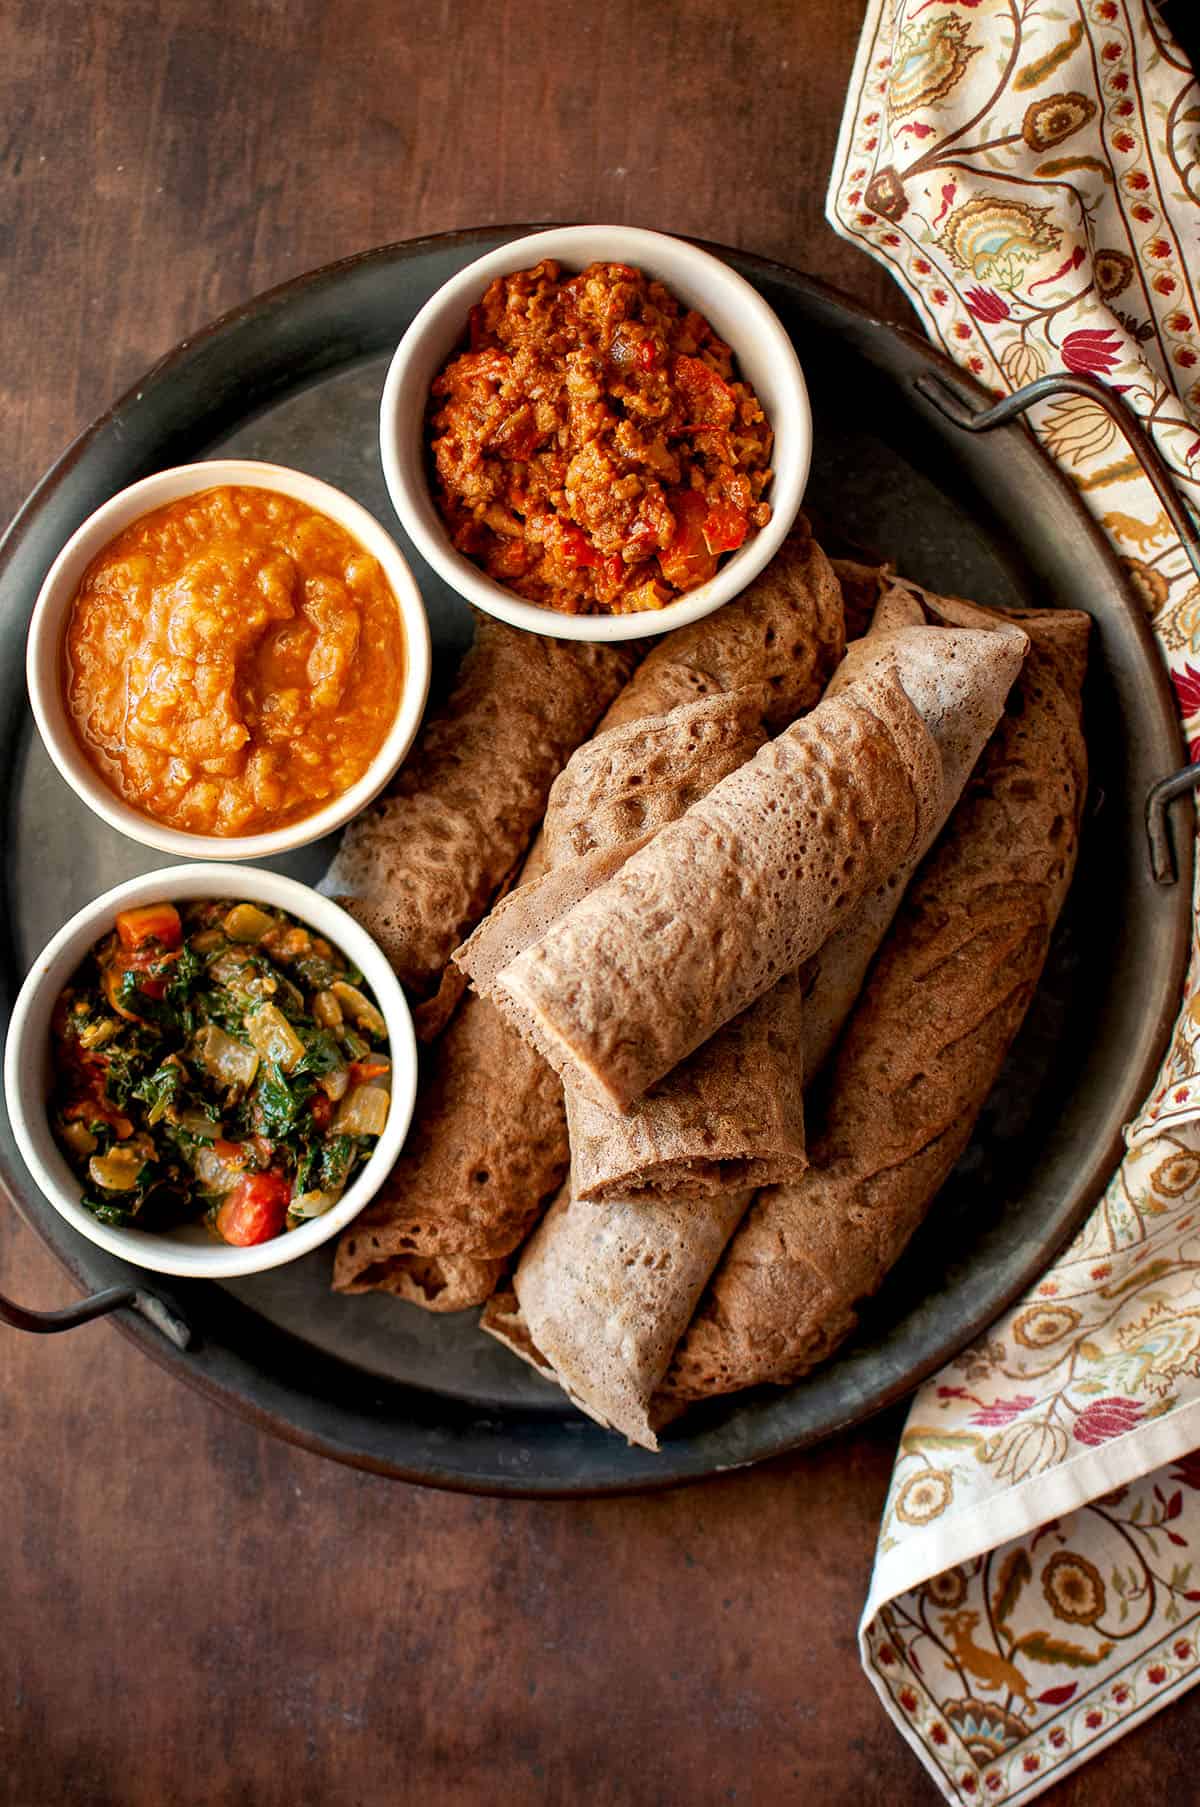 Tray with rolled Sourdough Injera and bowls of side dishes.